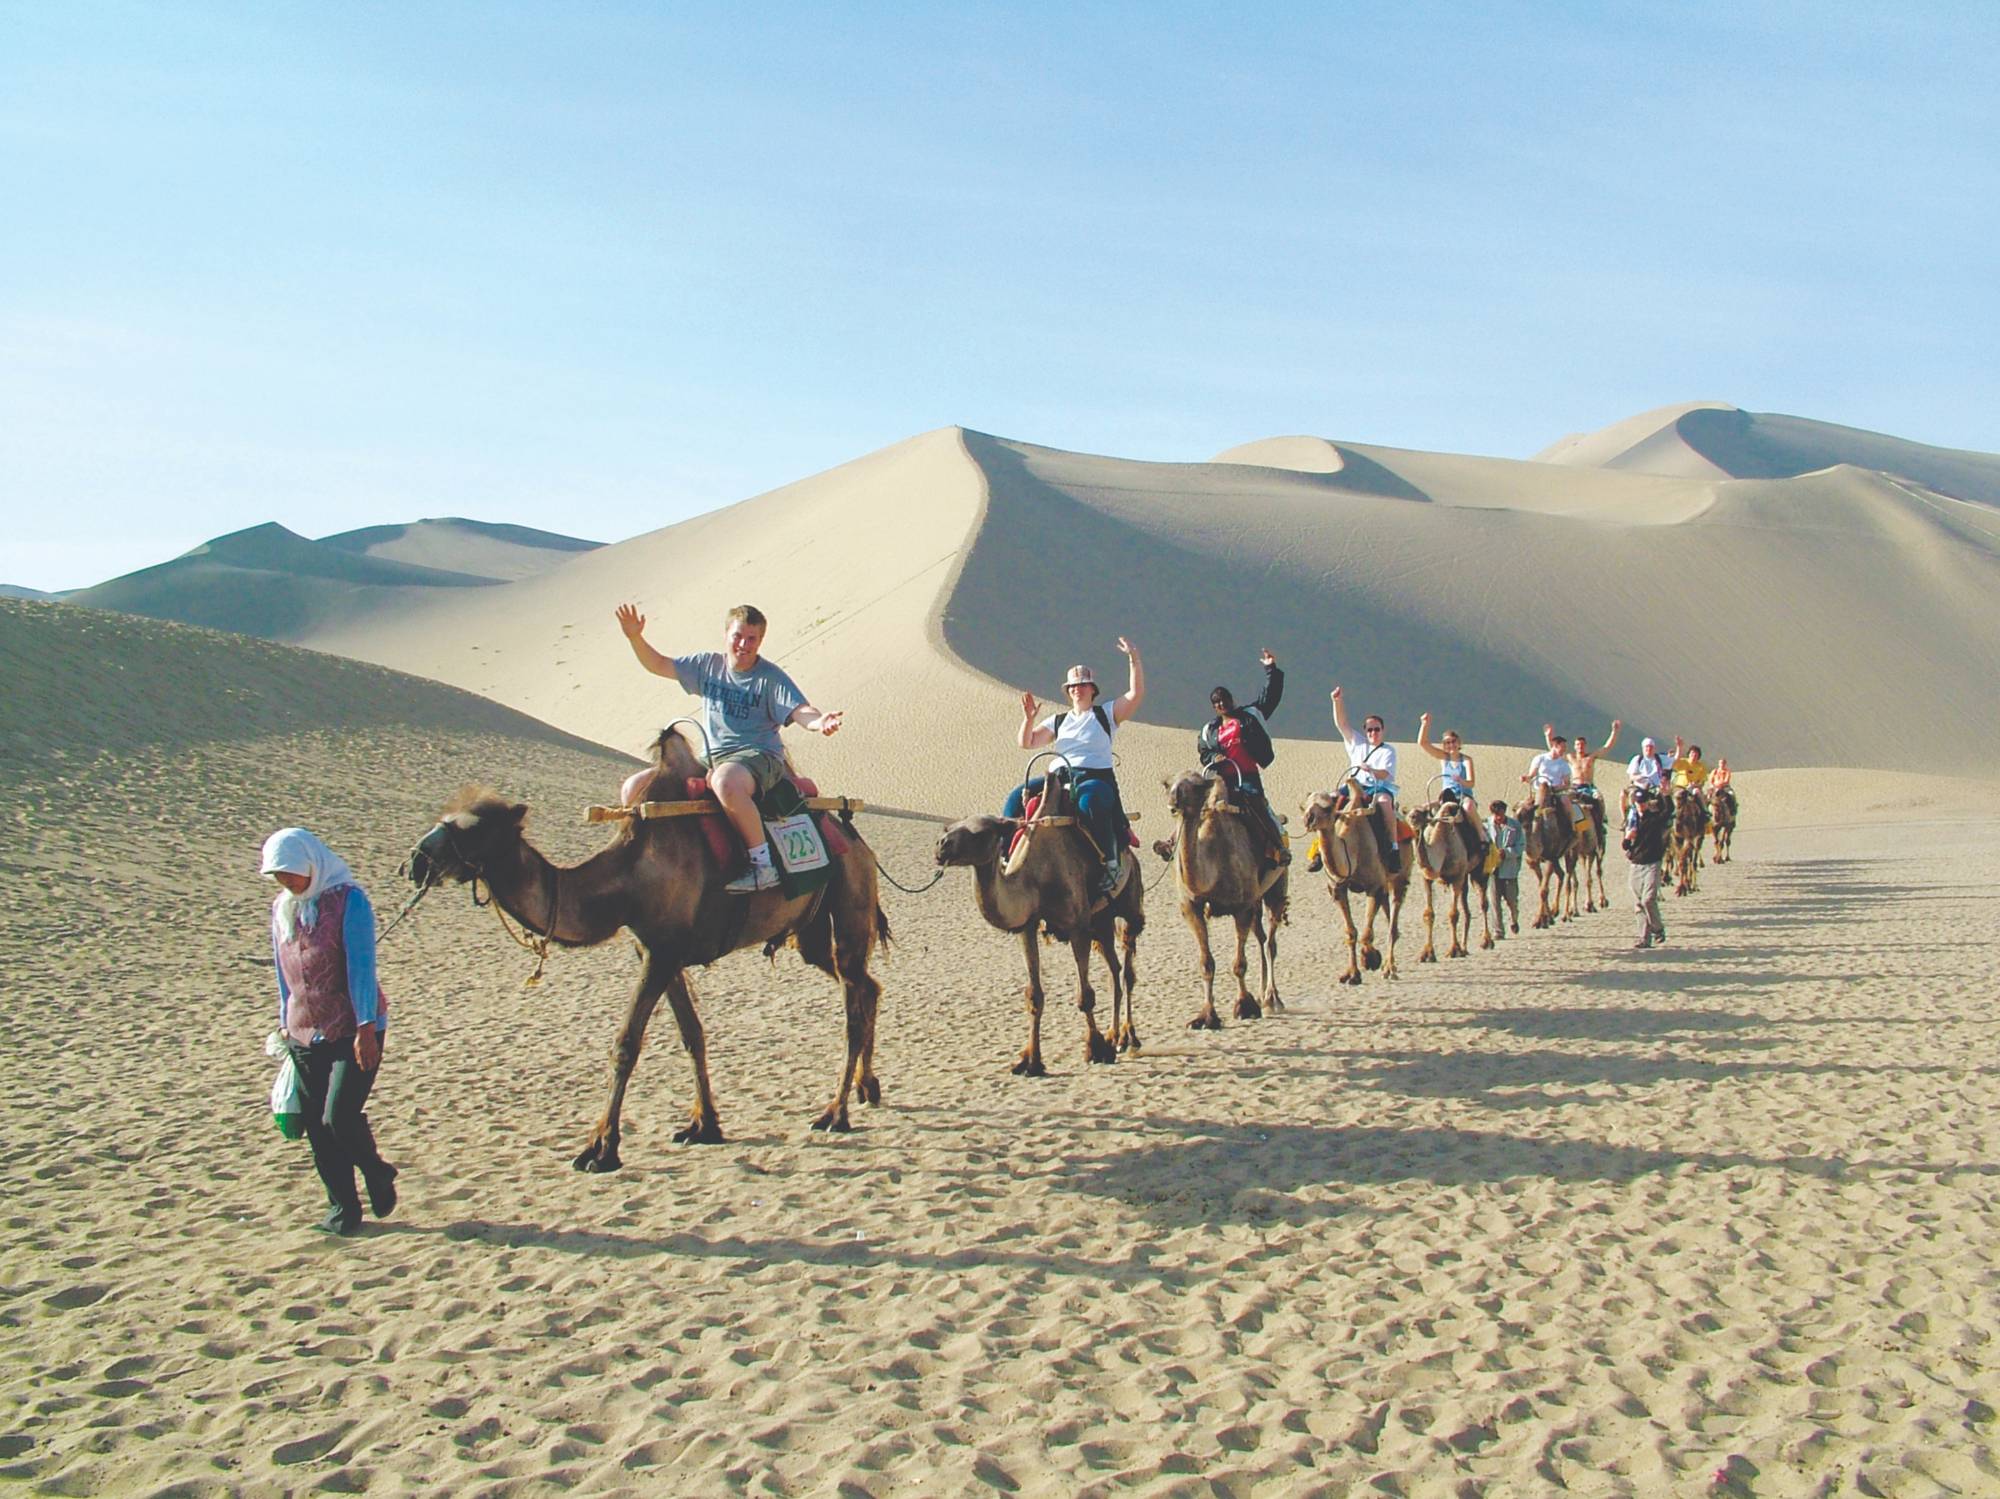 Group of students riding camels through the desert